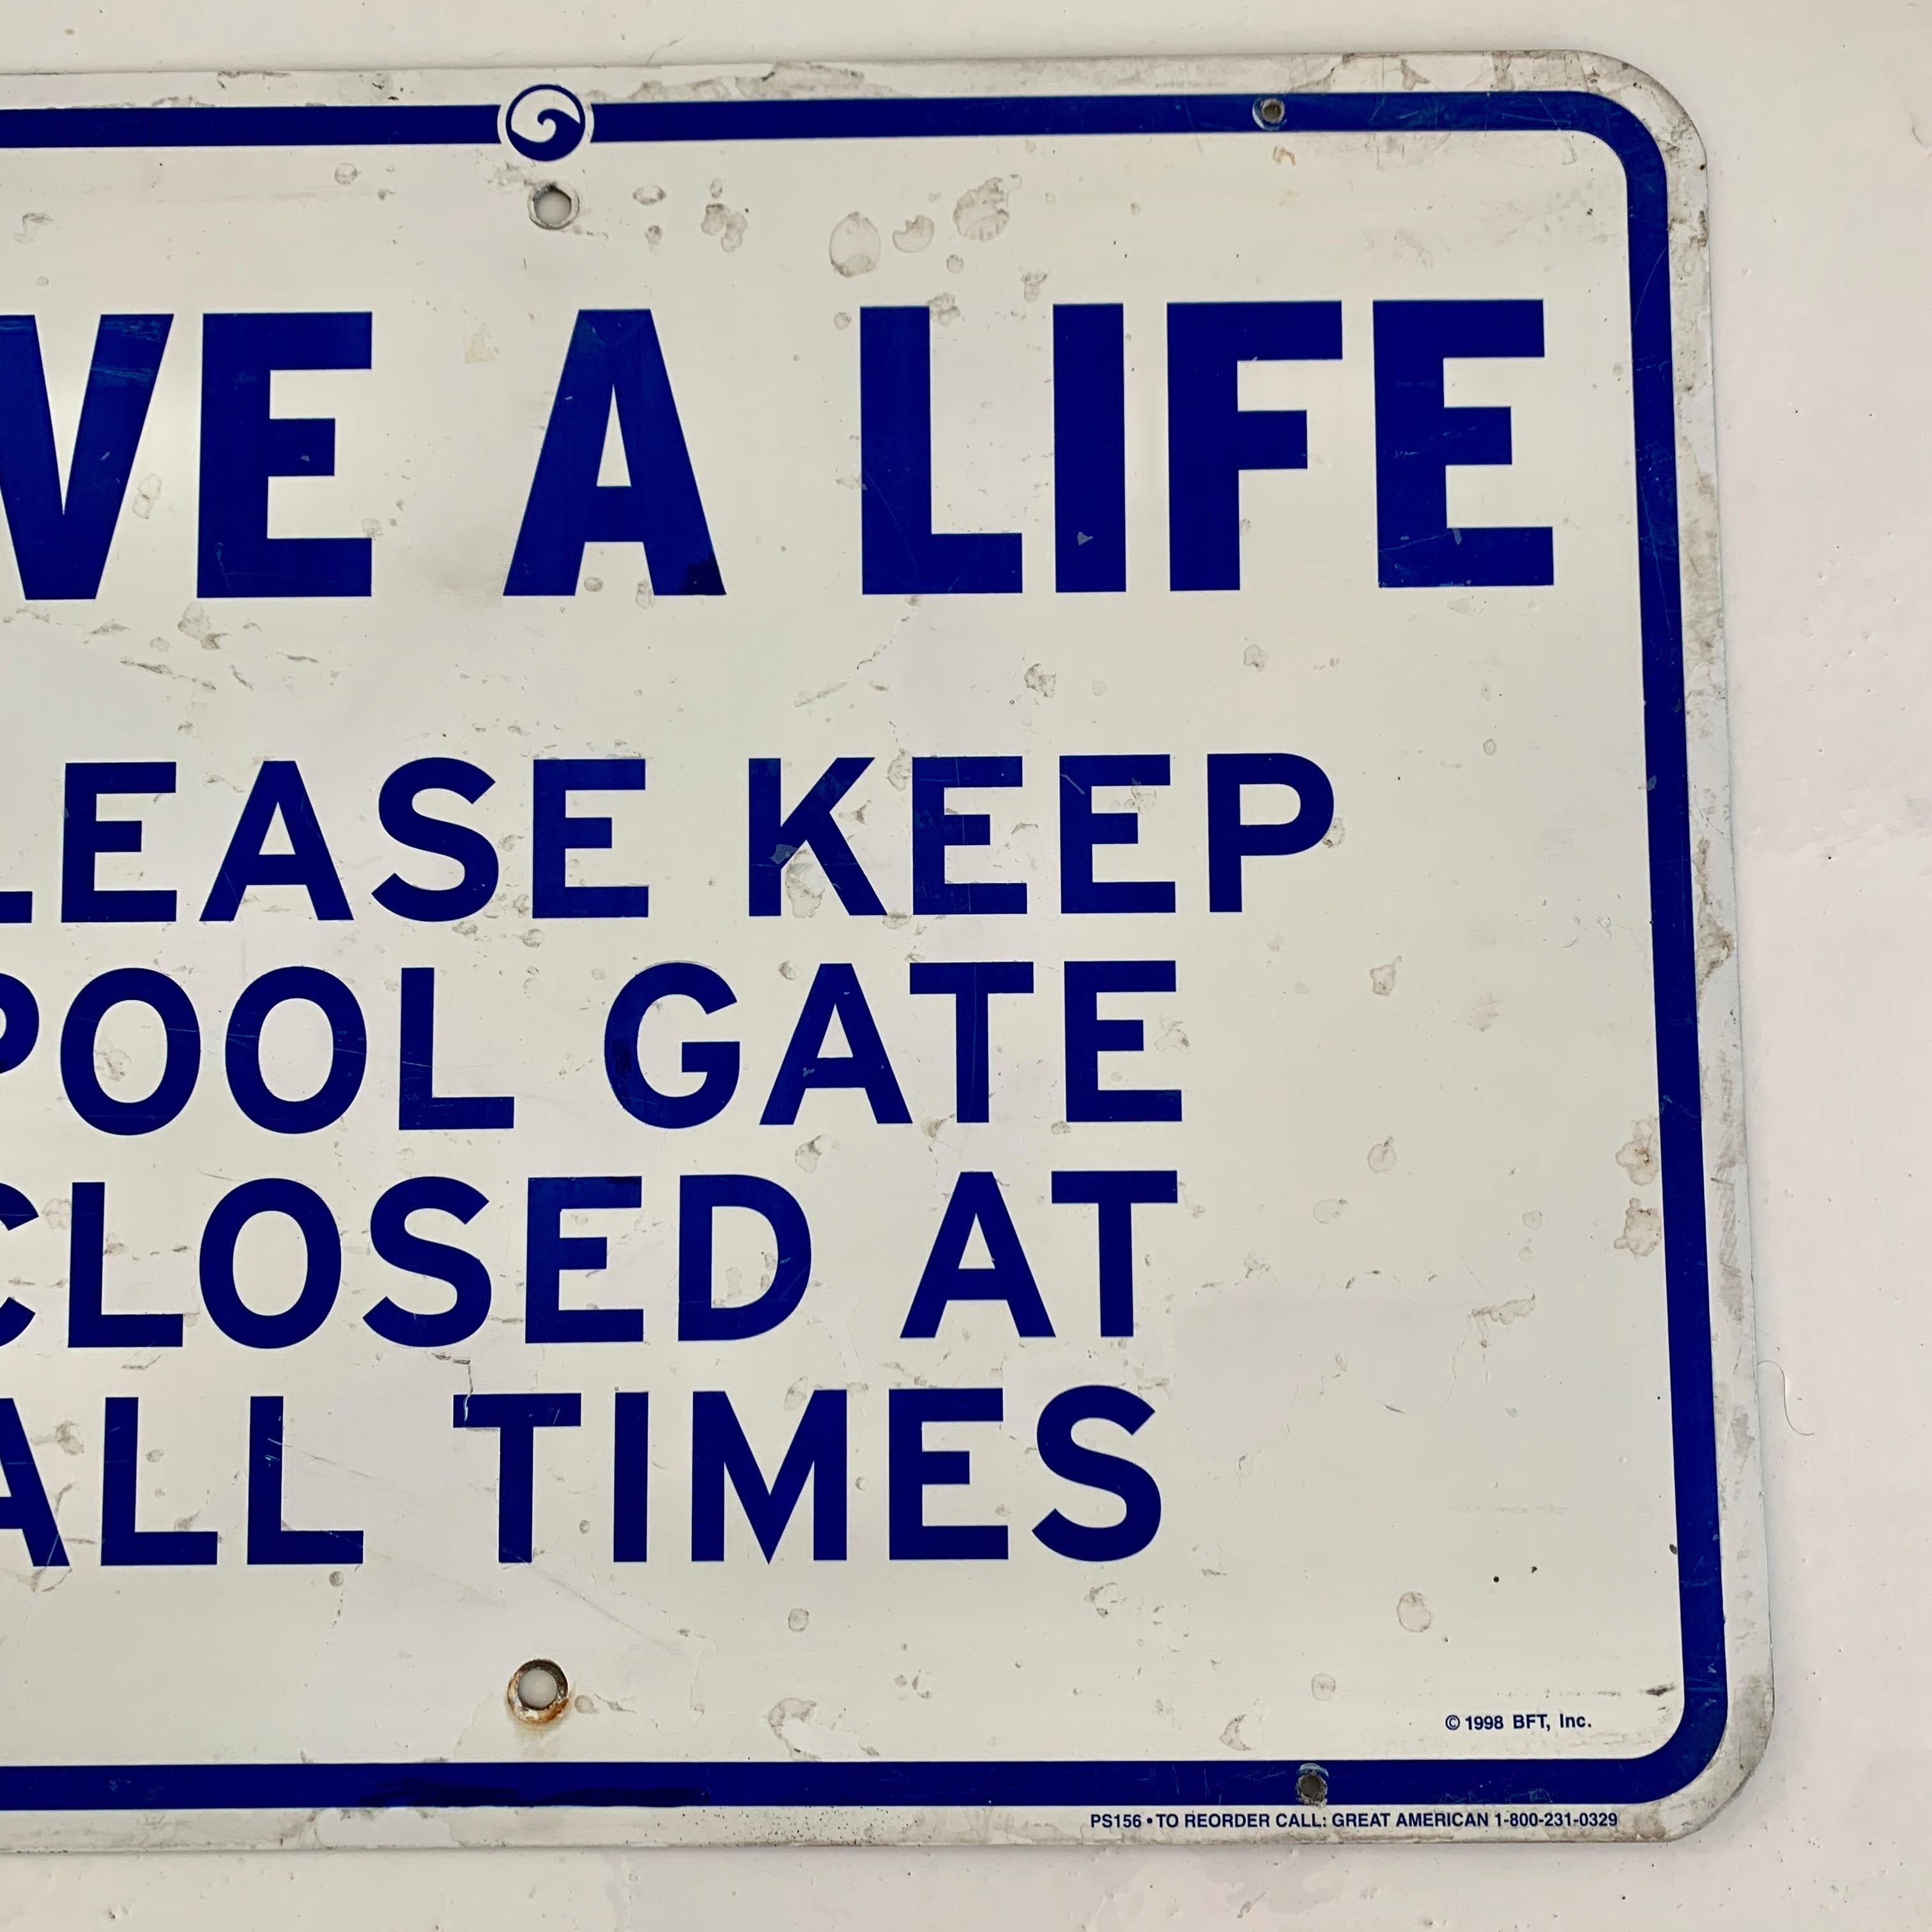 old swimming pool signs